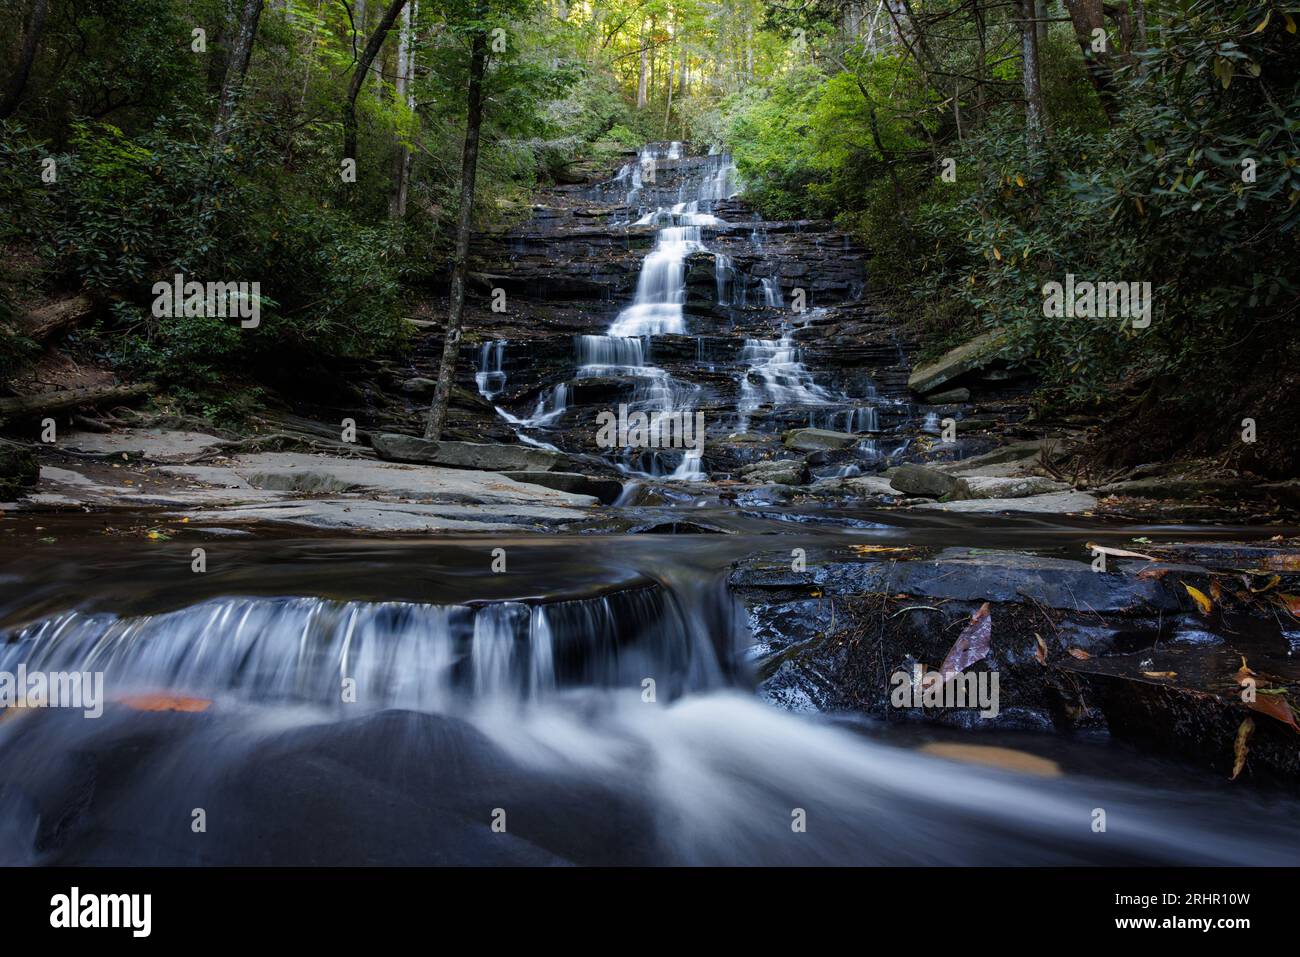 Sprinkled autumn leaves decorate the mountain side along Falls Branch at Minnehaha Falls. Stock Photo